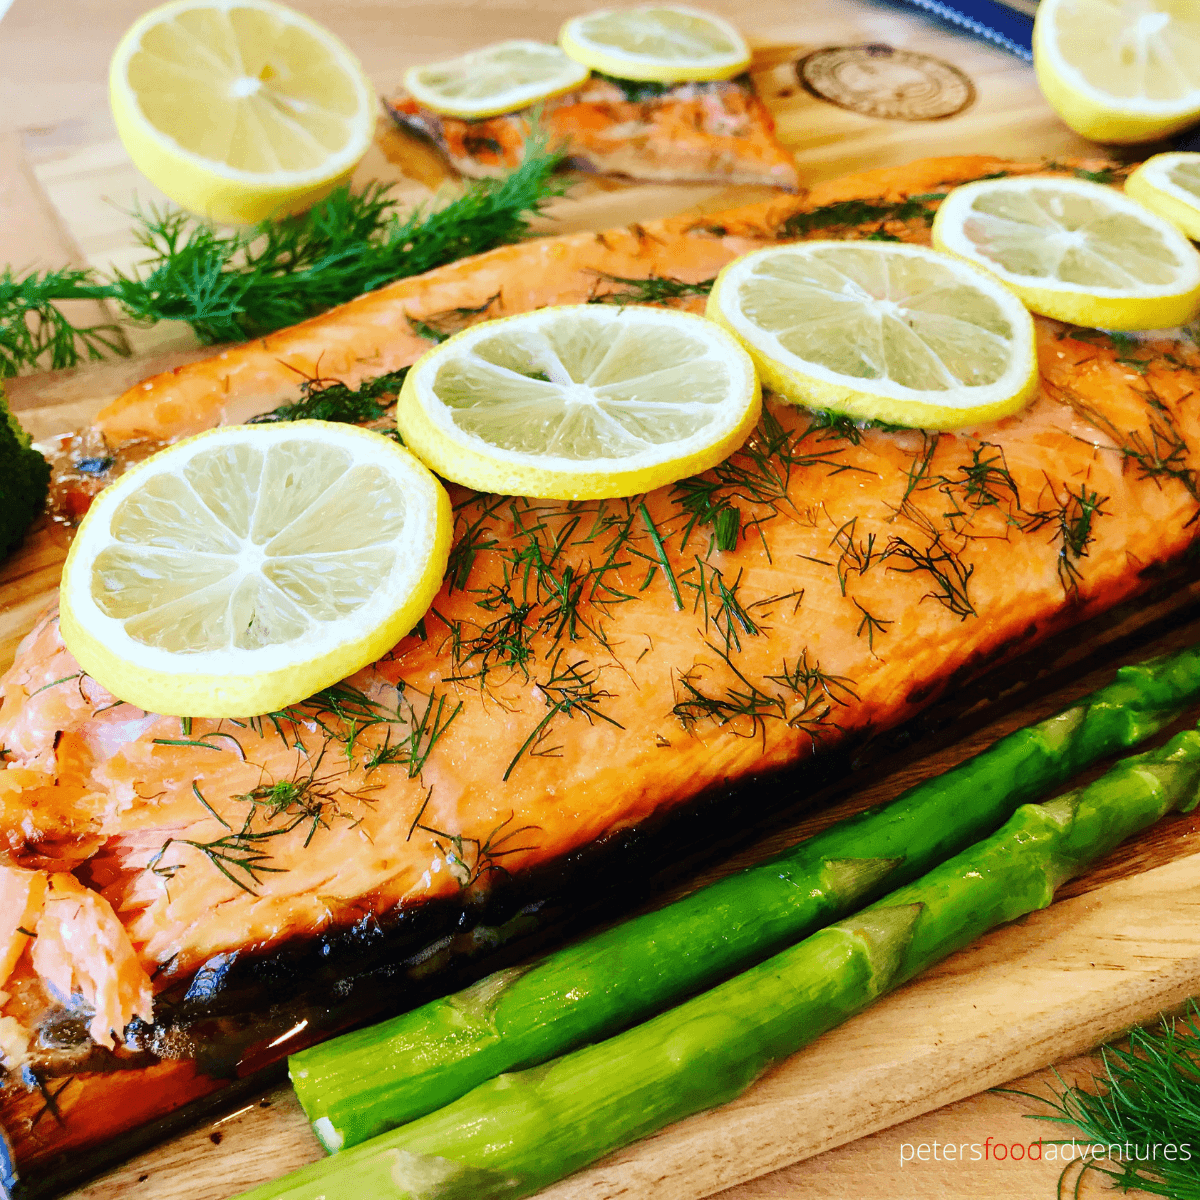 grilled trout with lemon sliced